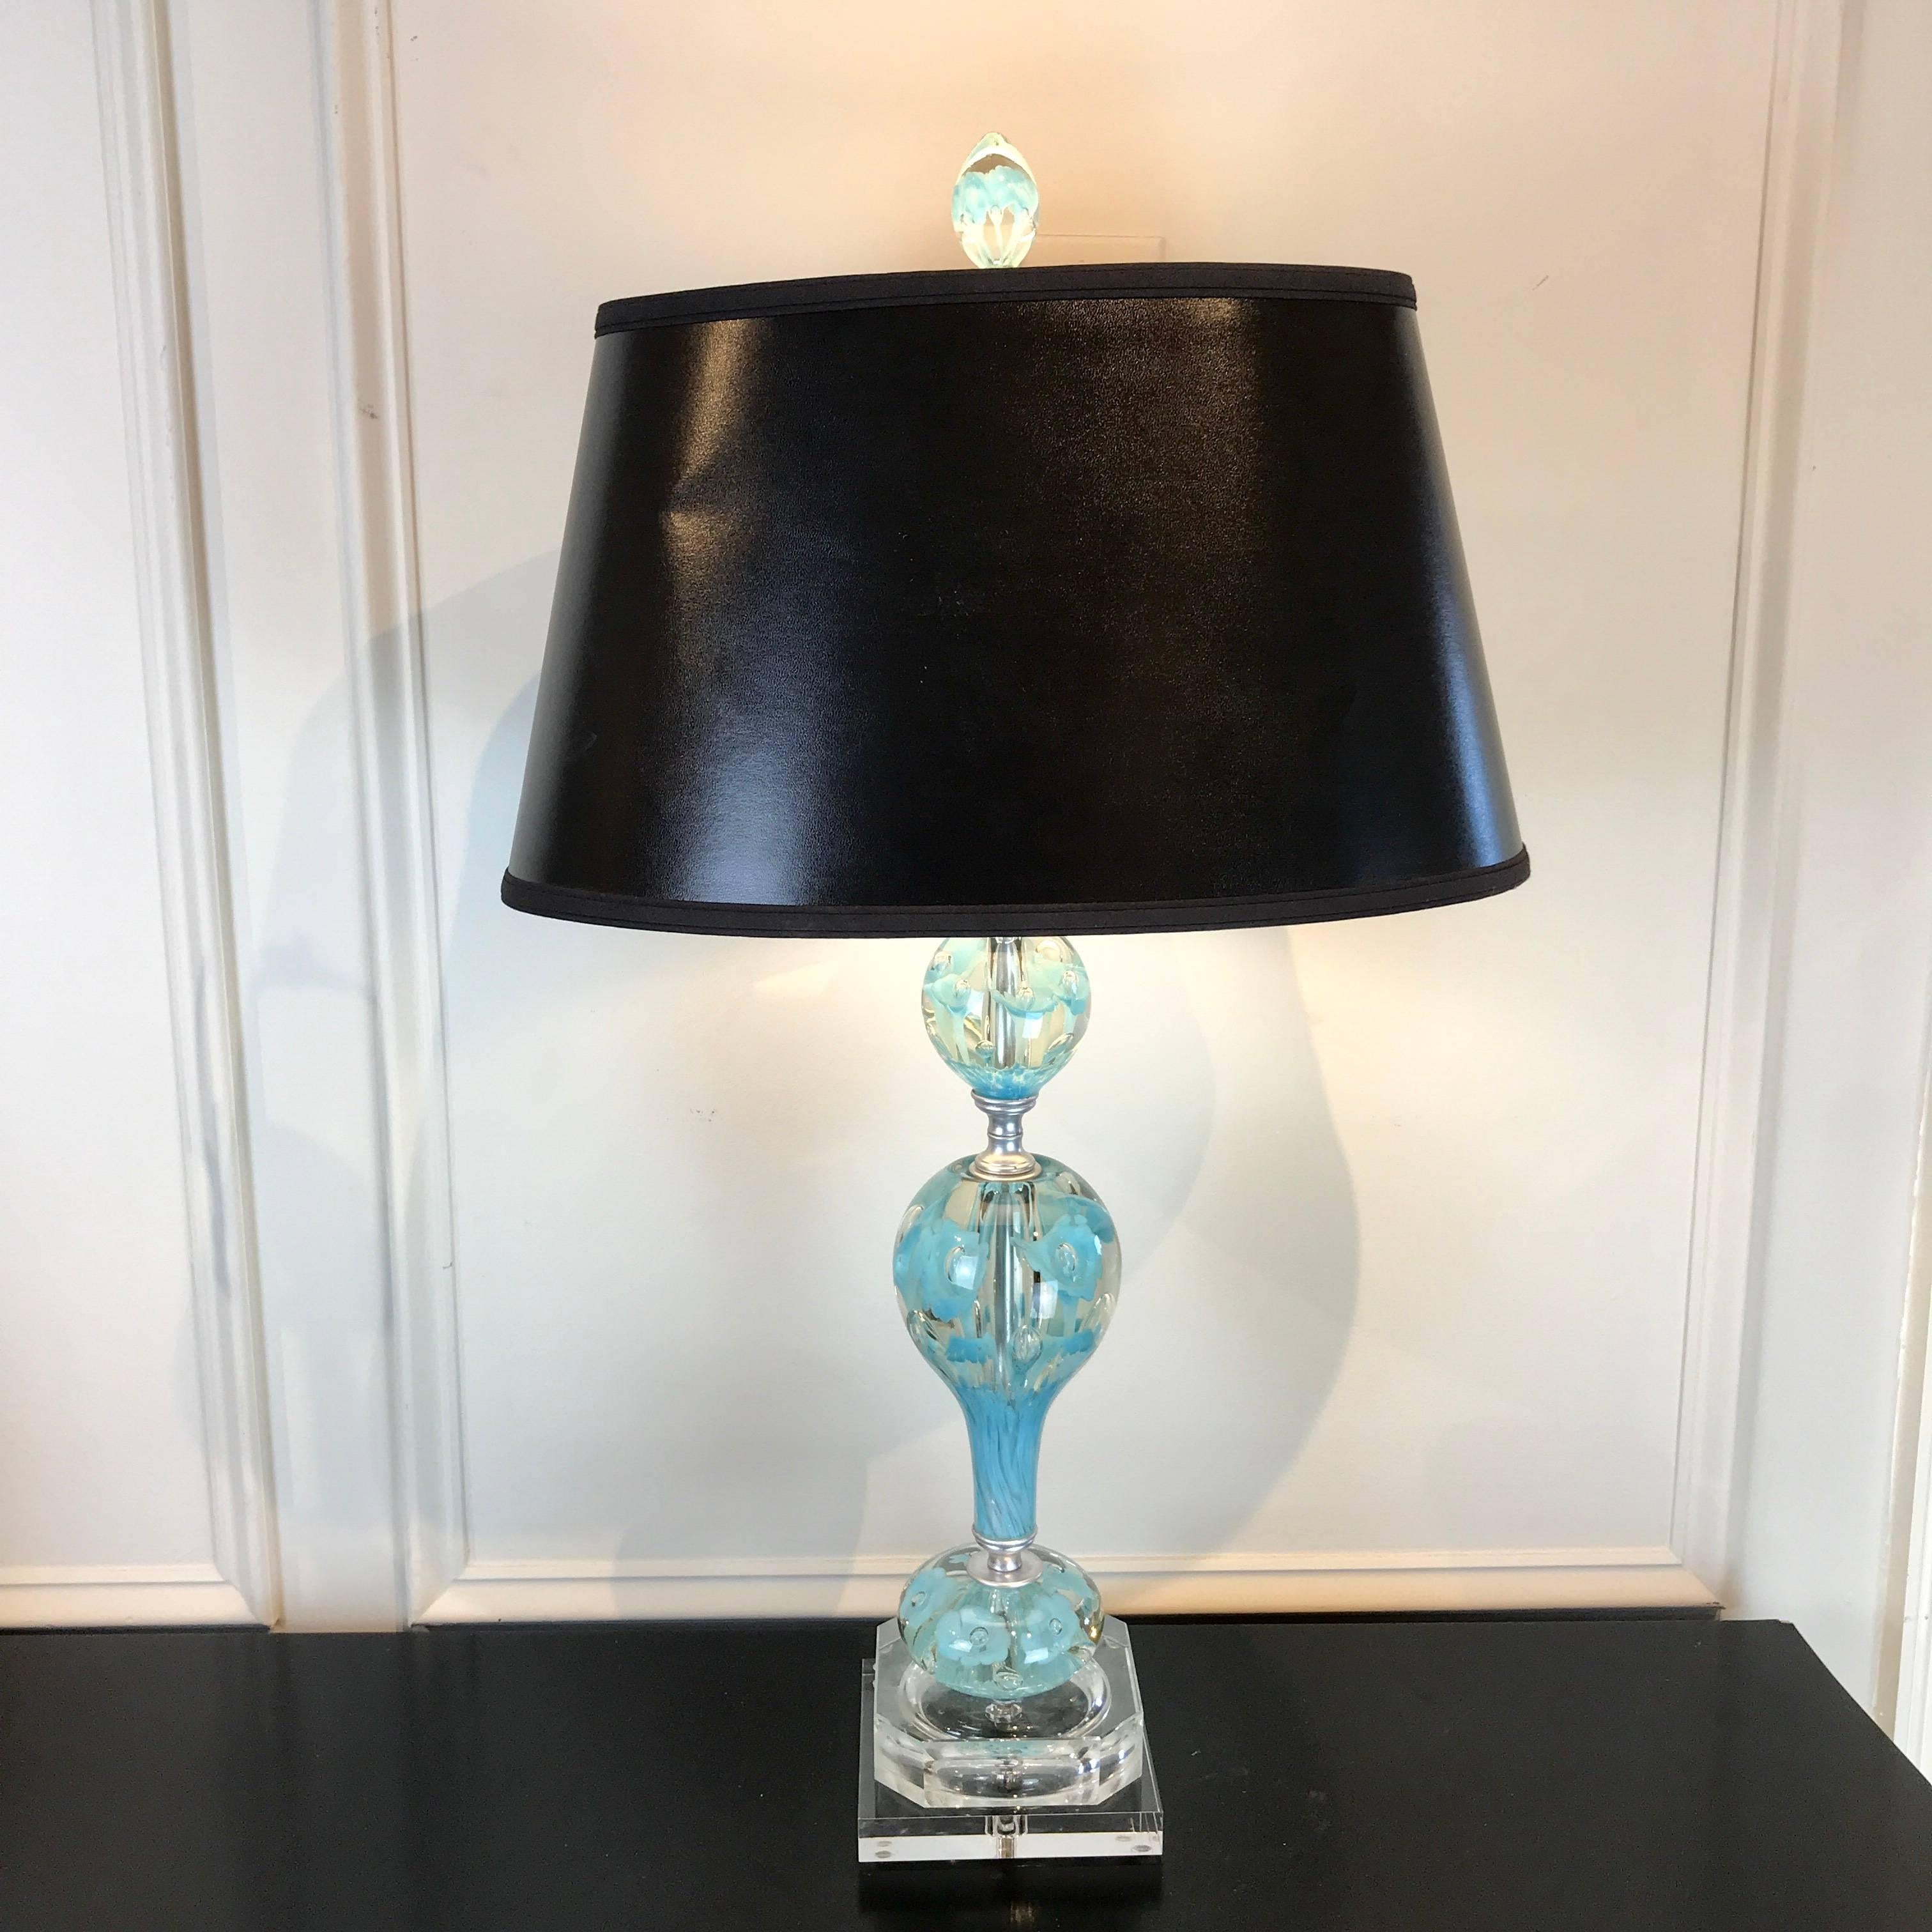 Midcentury Murano style glass and brass lamps, in turquoise. Exquisite color, complete with matching 3